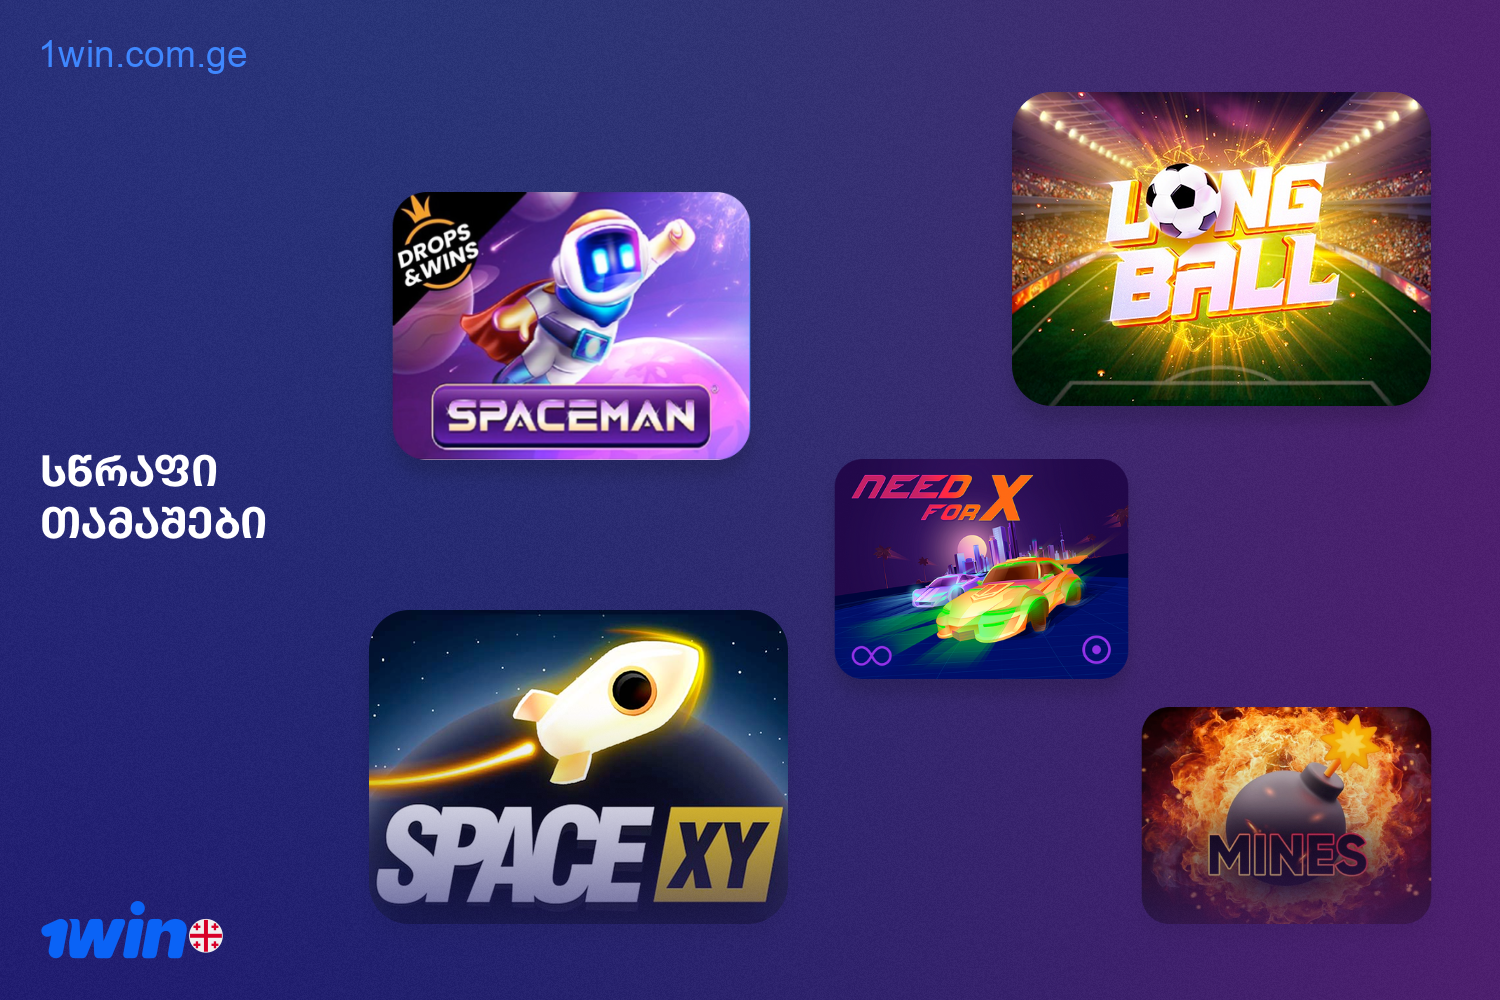 Popular crash games are available for 1win casino users from Georgia